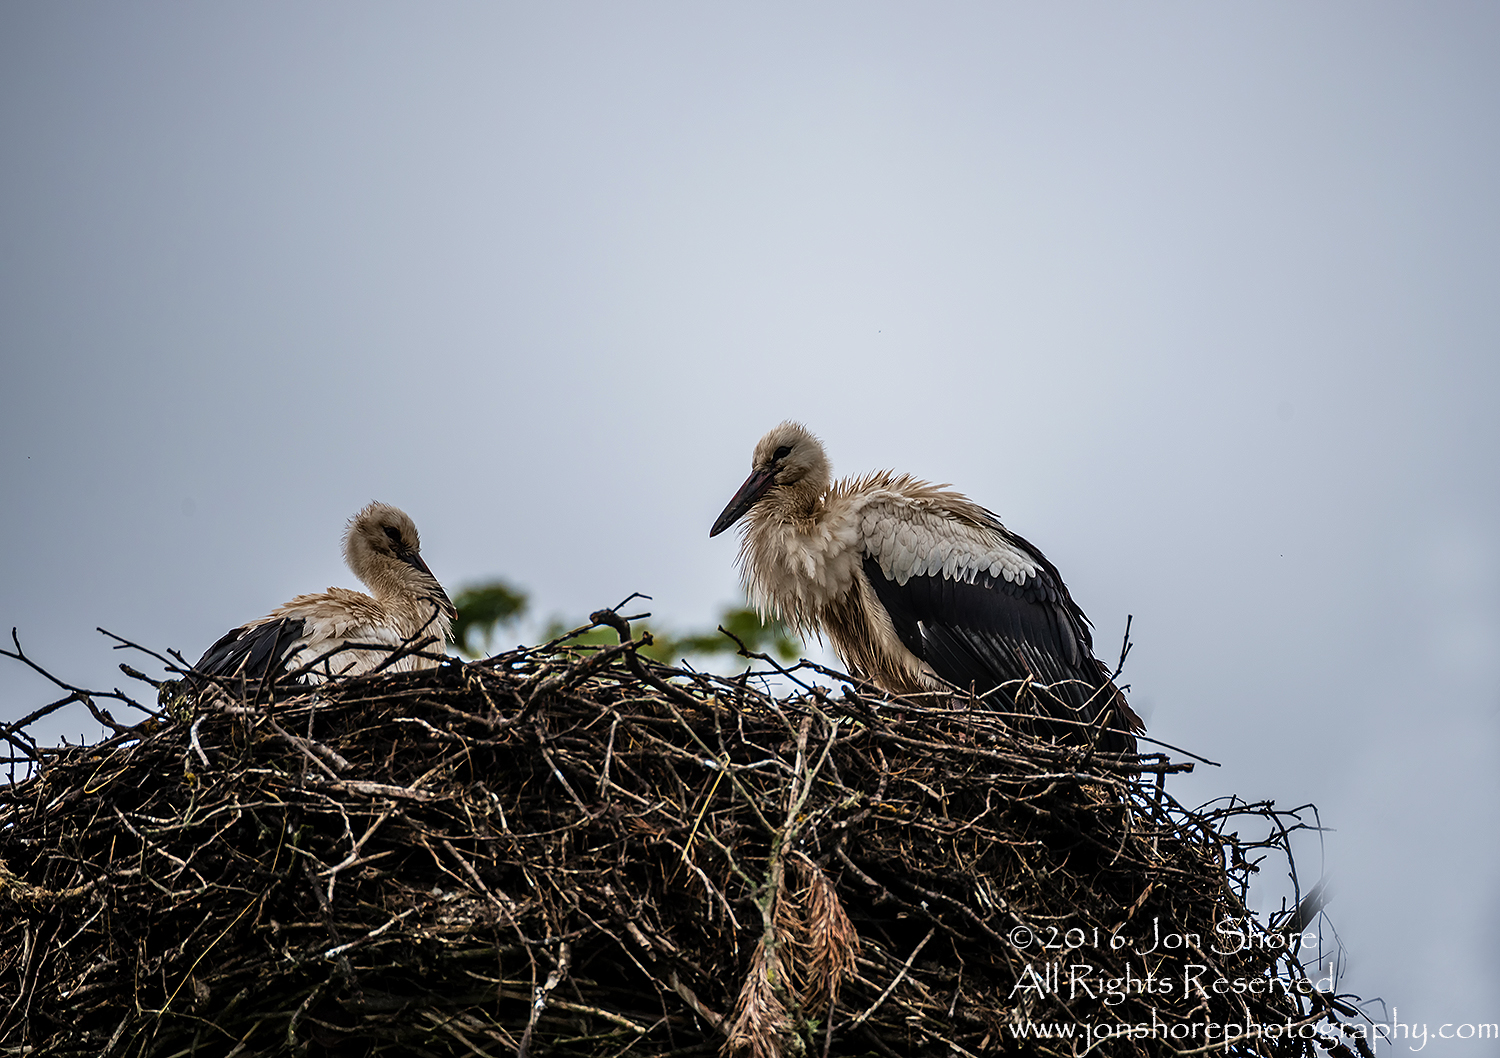 Young Storks wet and in nest.